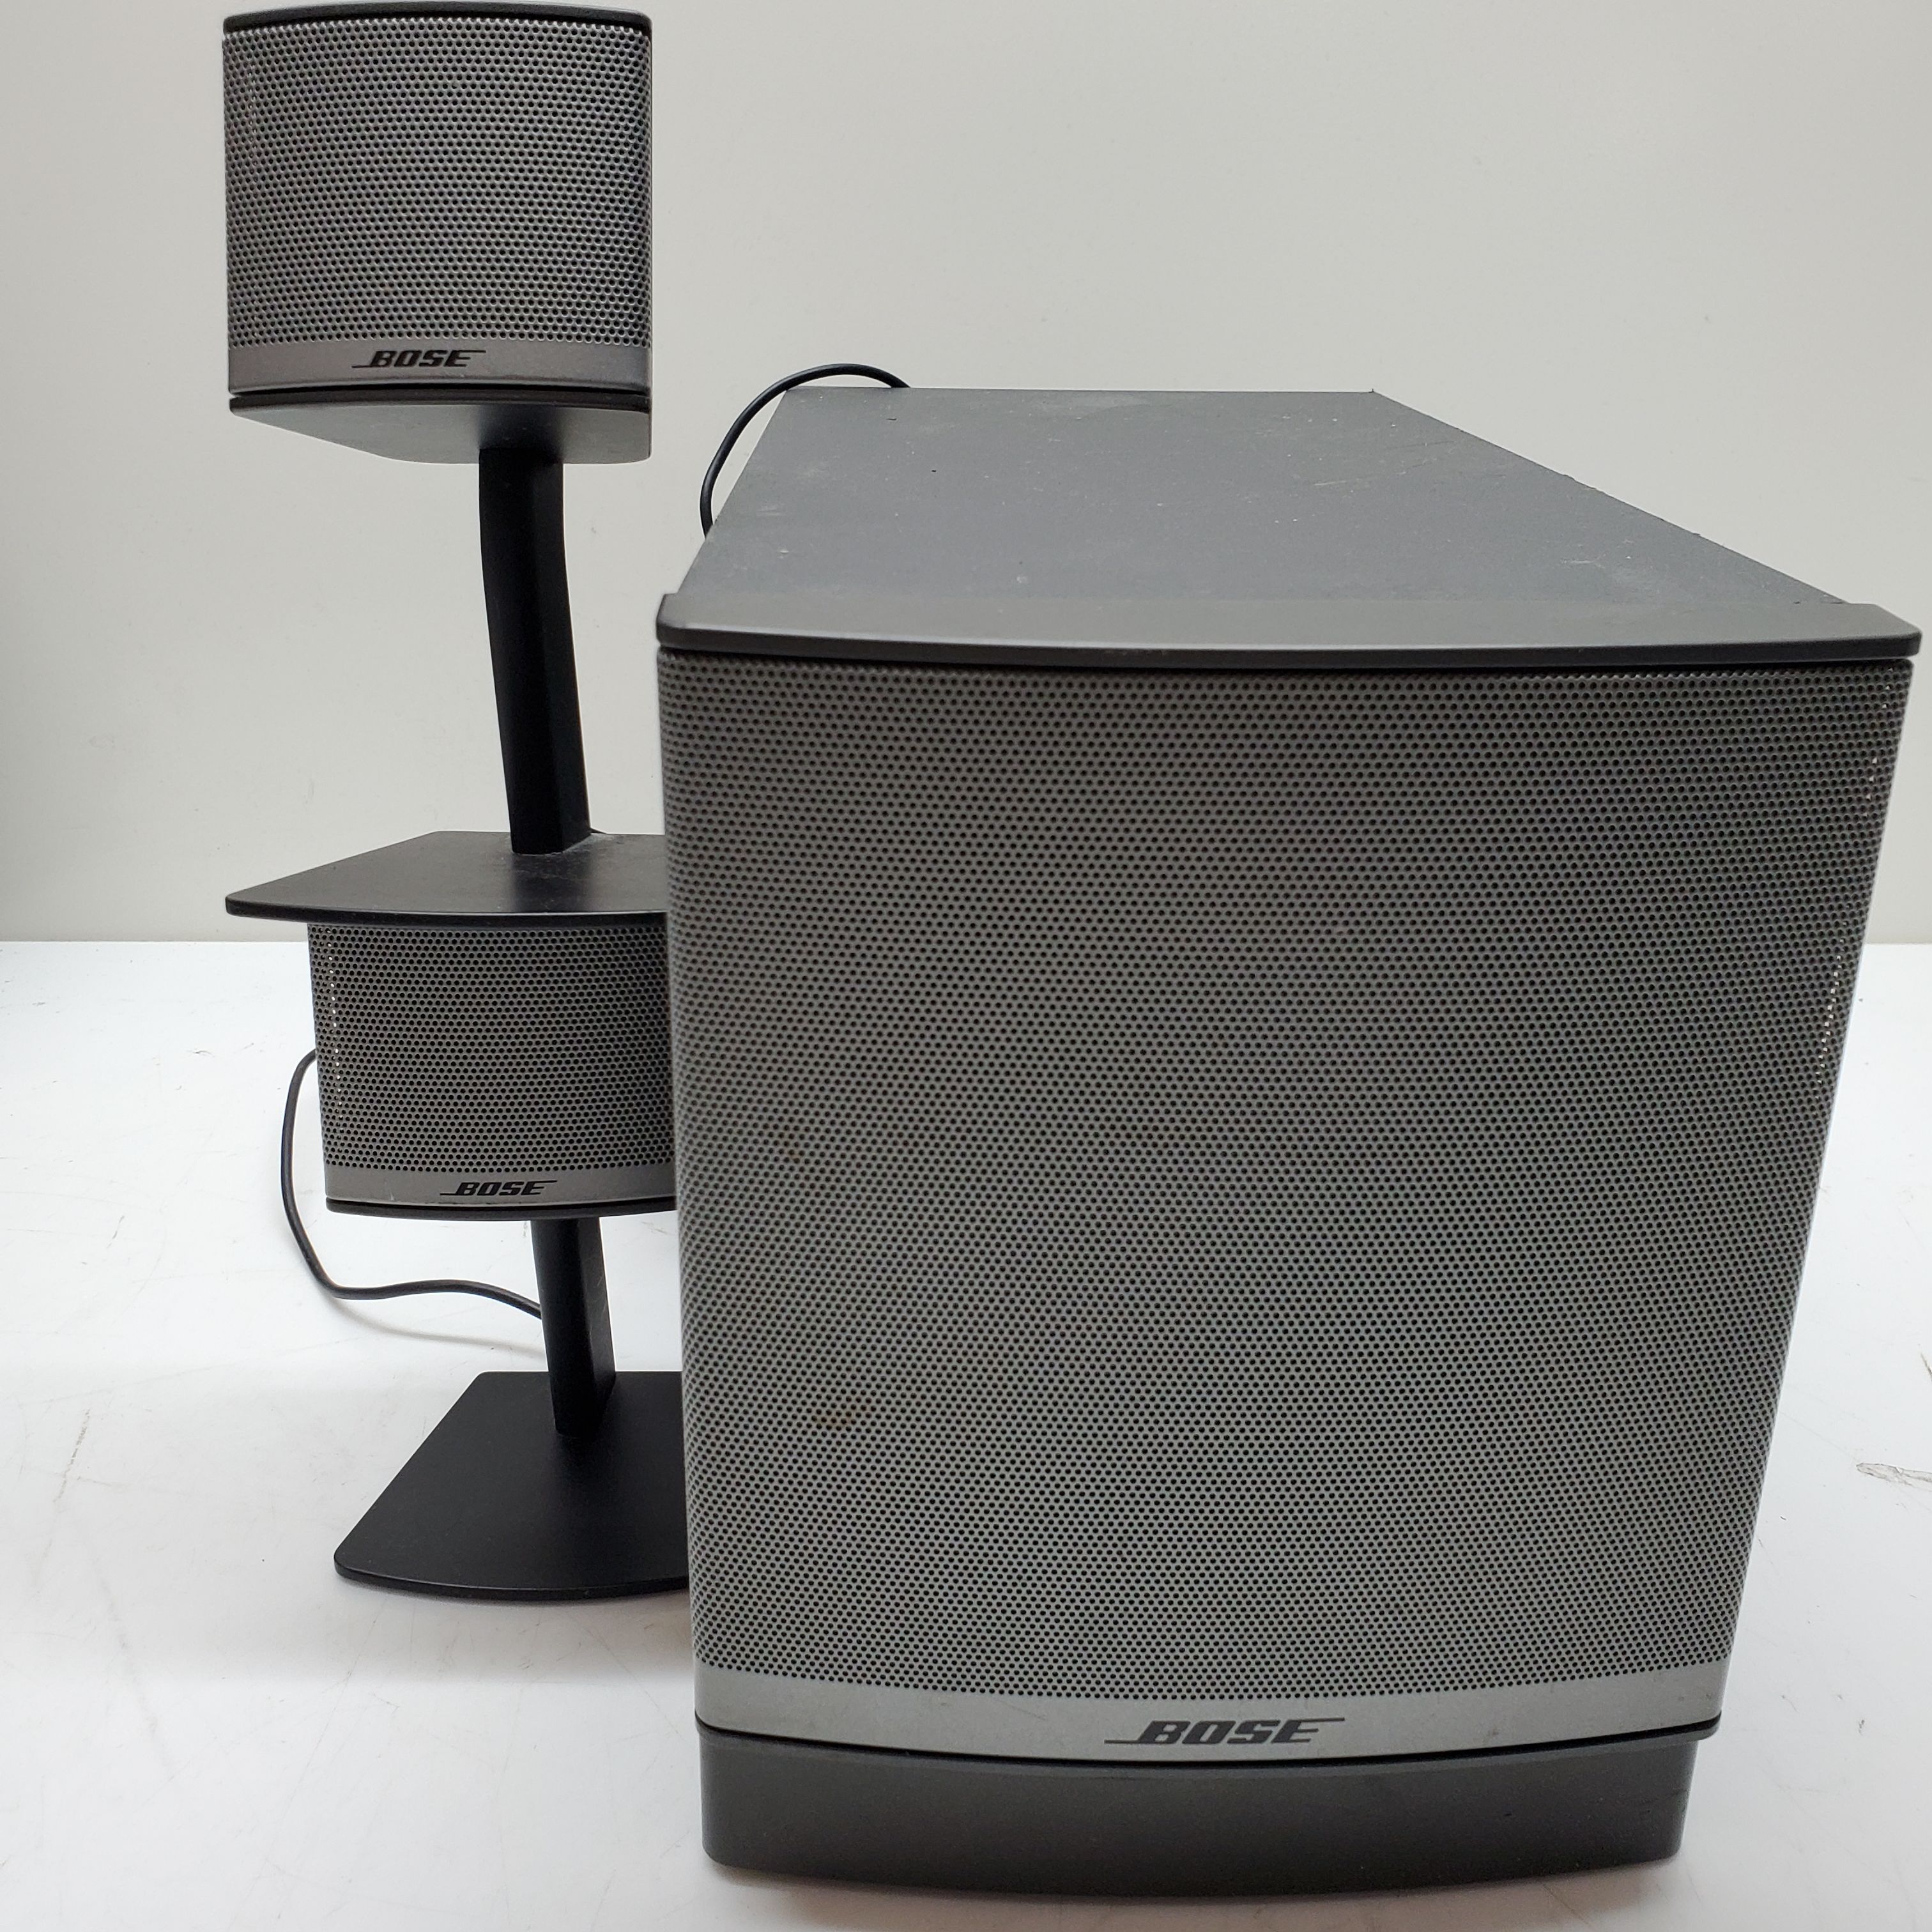 Buy the Bose Companion 3 Series II Multimedia Speaker System For 